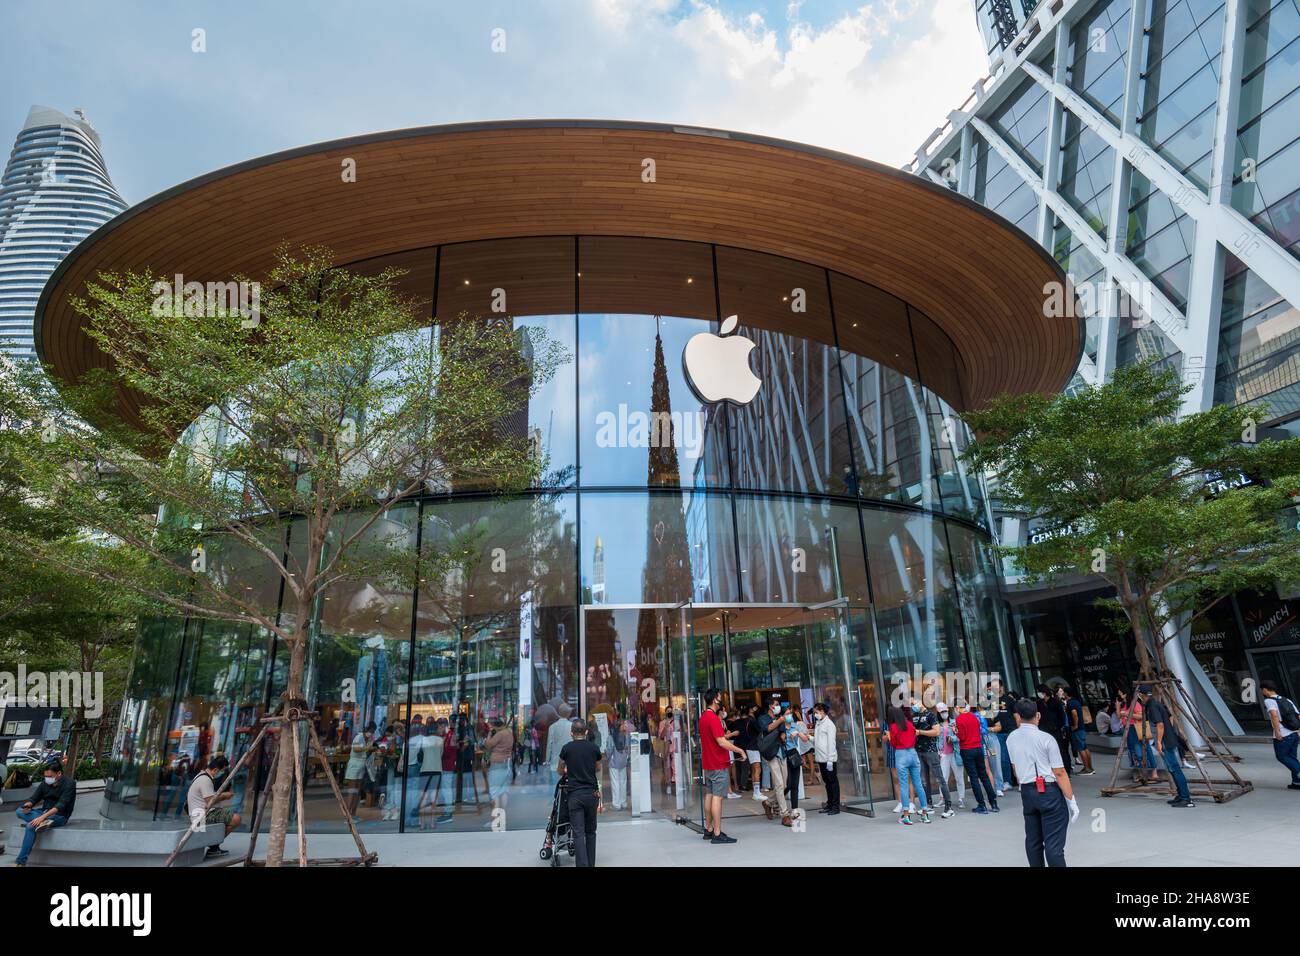 Bangkok, Thailand - December 2021: Apple Store with Apple logo in Bangkok at Central World, the second, the largest Apple retail location in Thailand Stock Photo